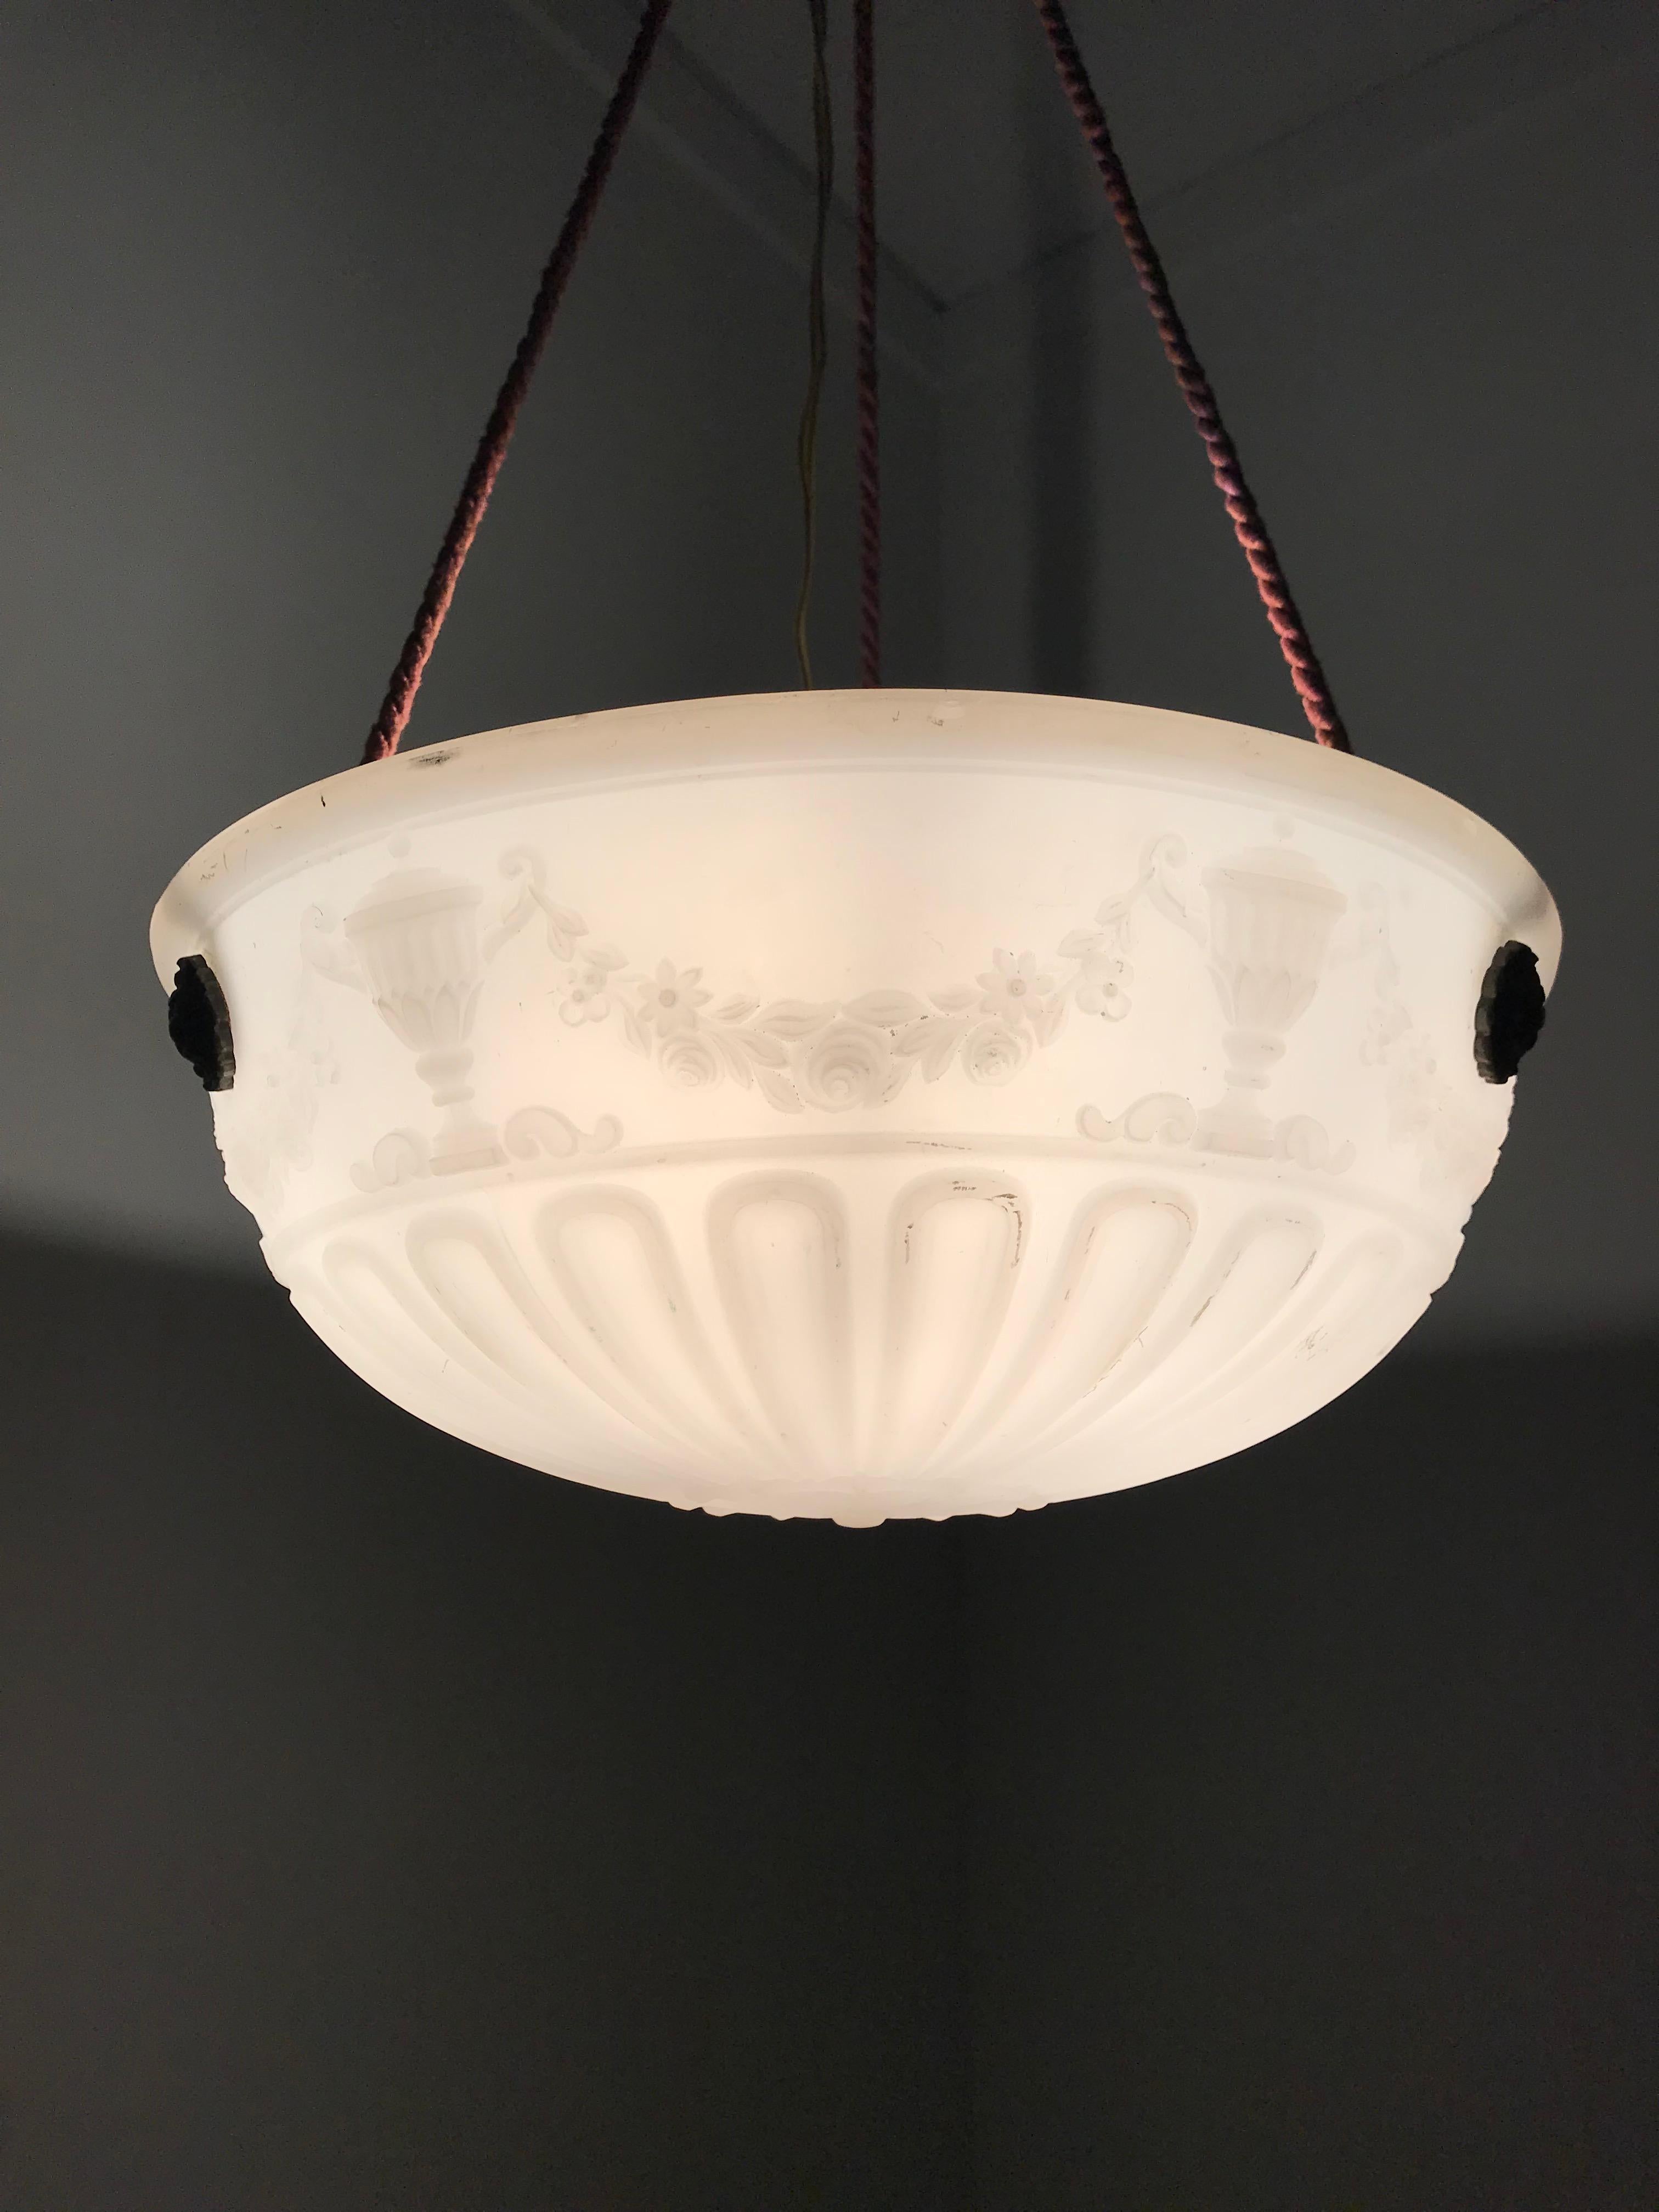 Striking Classical Design Press Glass with Original Rope Pendant / Light Fixture For Sale 2